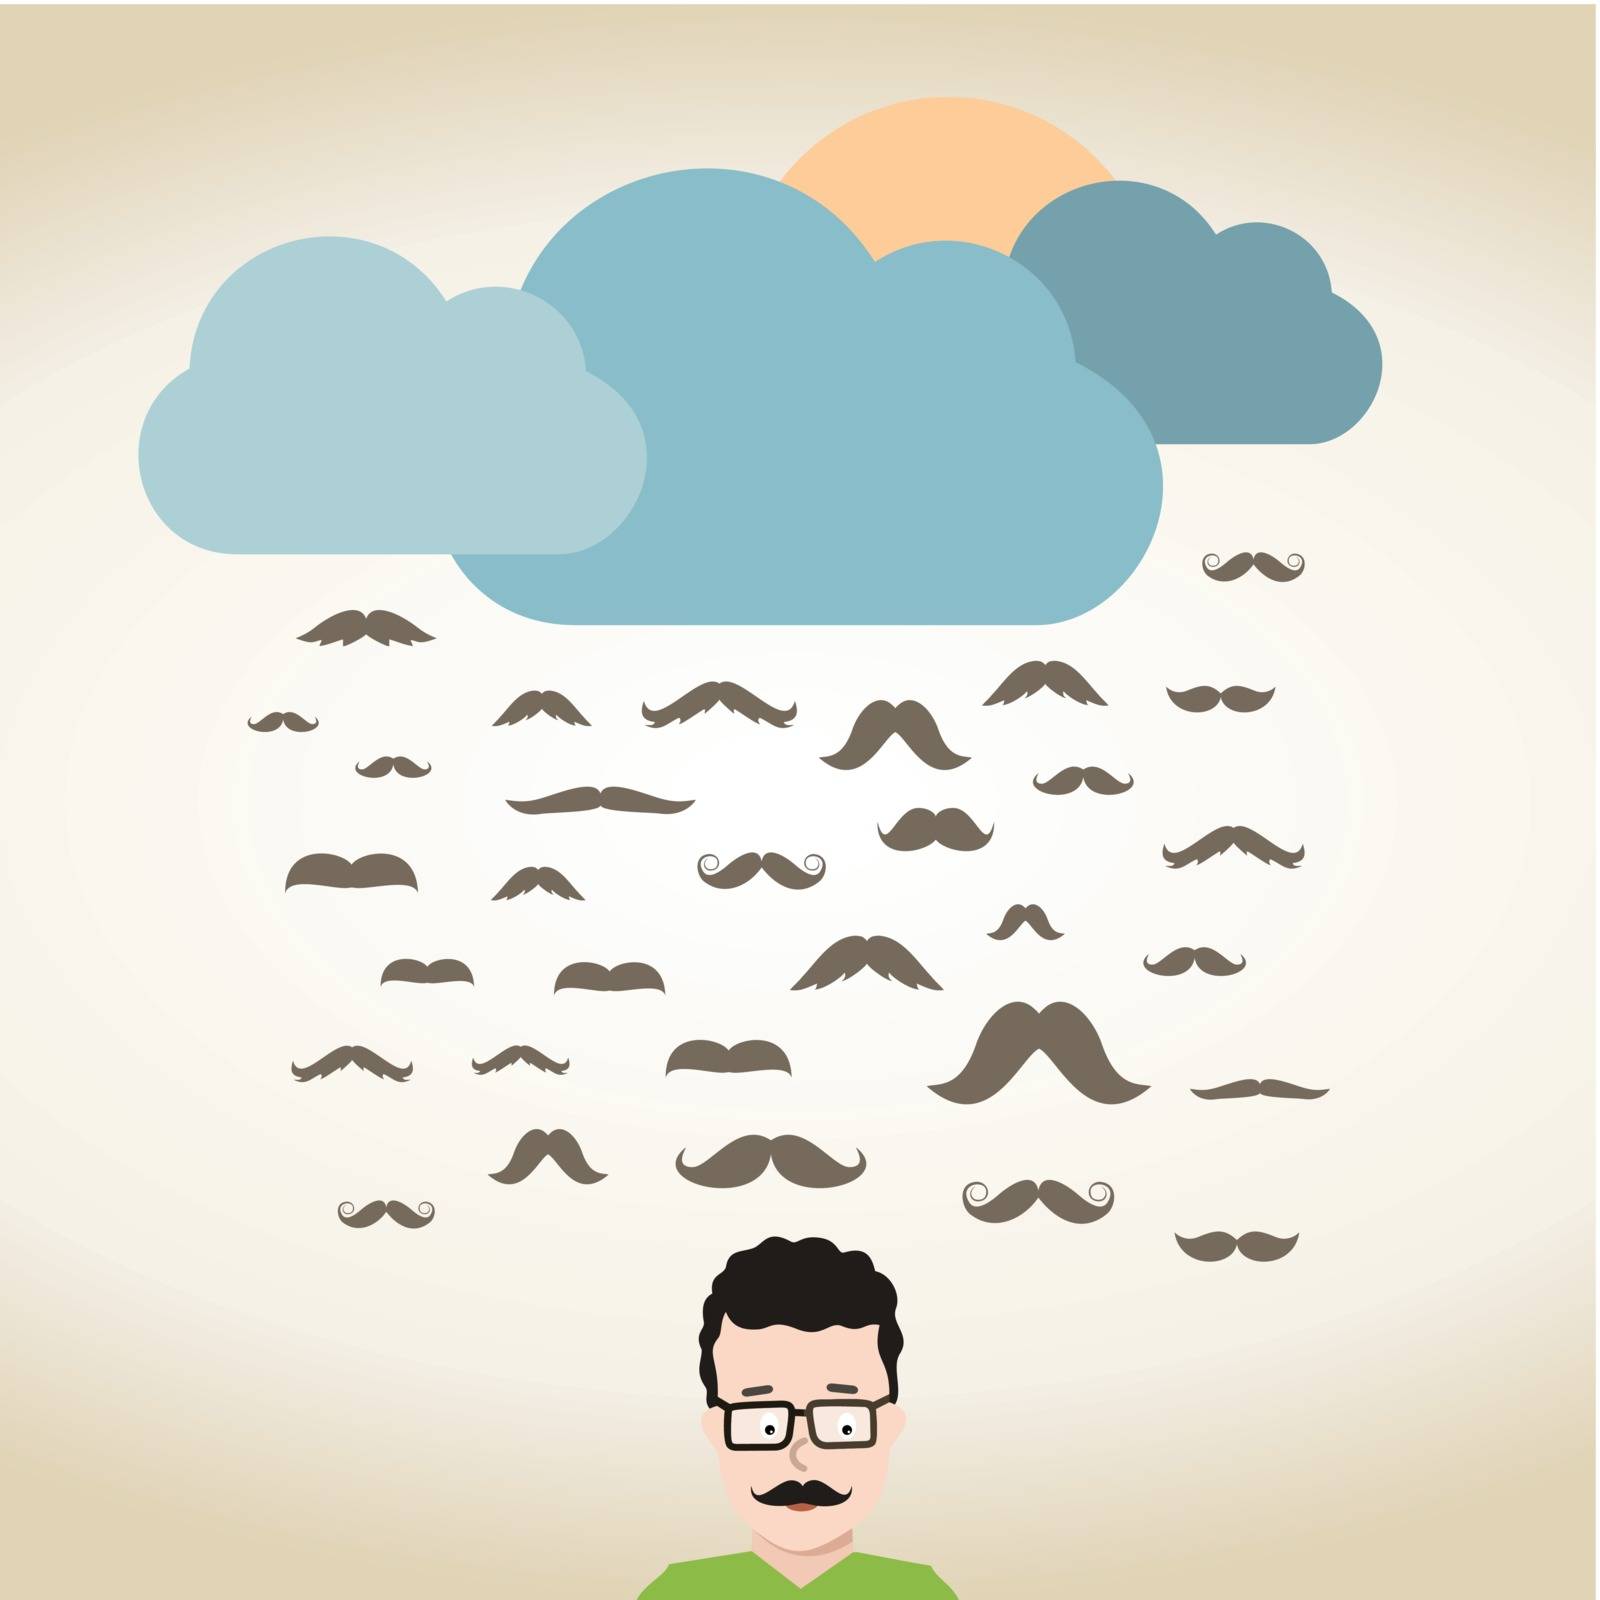 Rain from moustaches on the person. A vector illustration